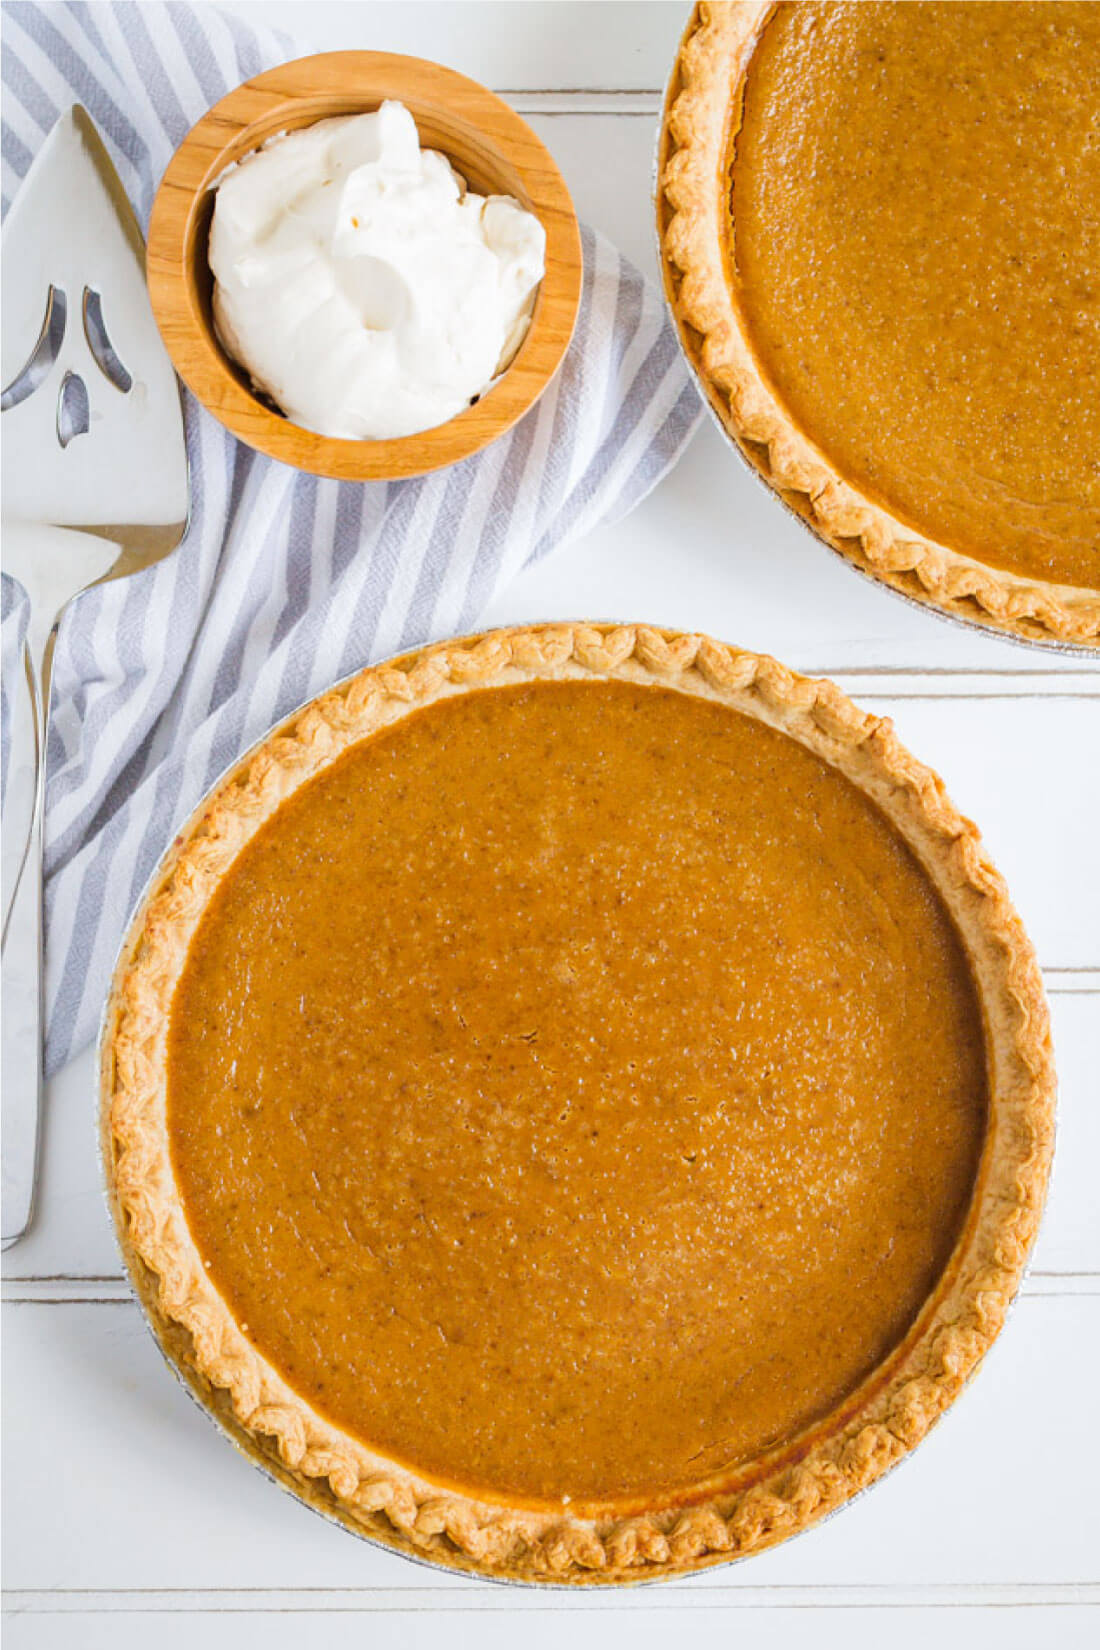 Simple, classic Pumpkin Pie recipe that you will love!! And it has homemade whipped cream to boot. from thirtyhandmadedays.com